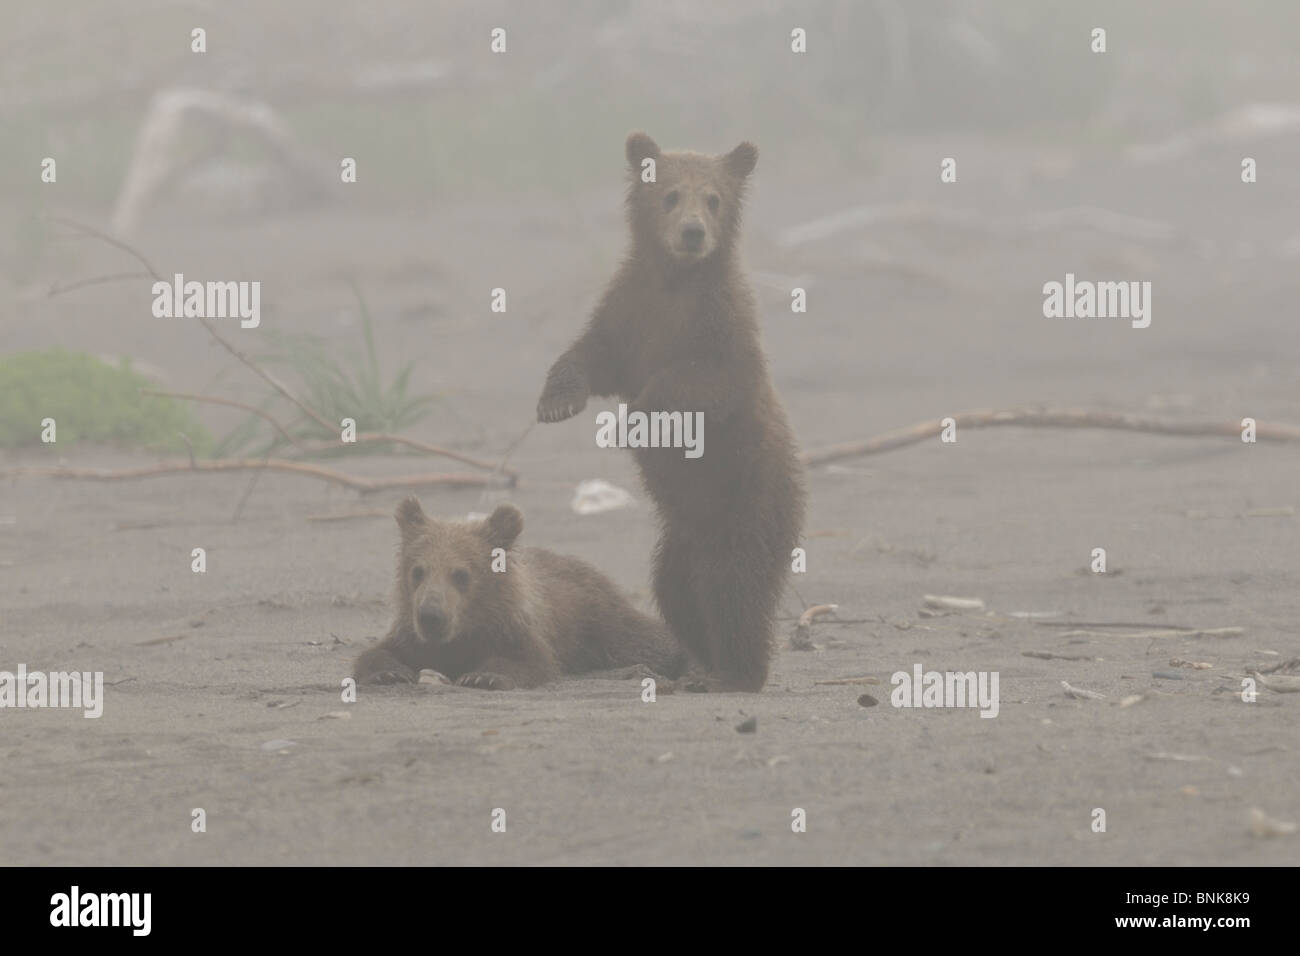 Stock photo of two Alaskan brown bear cubs standing together on a beach in the fog. Stock Photo